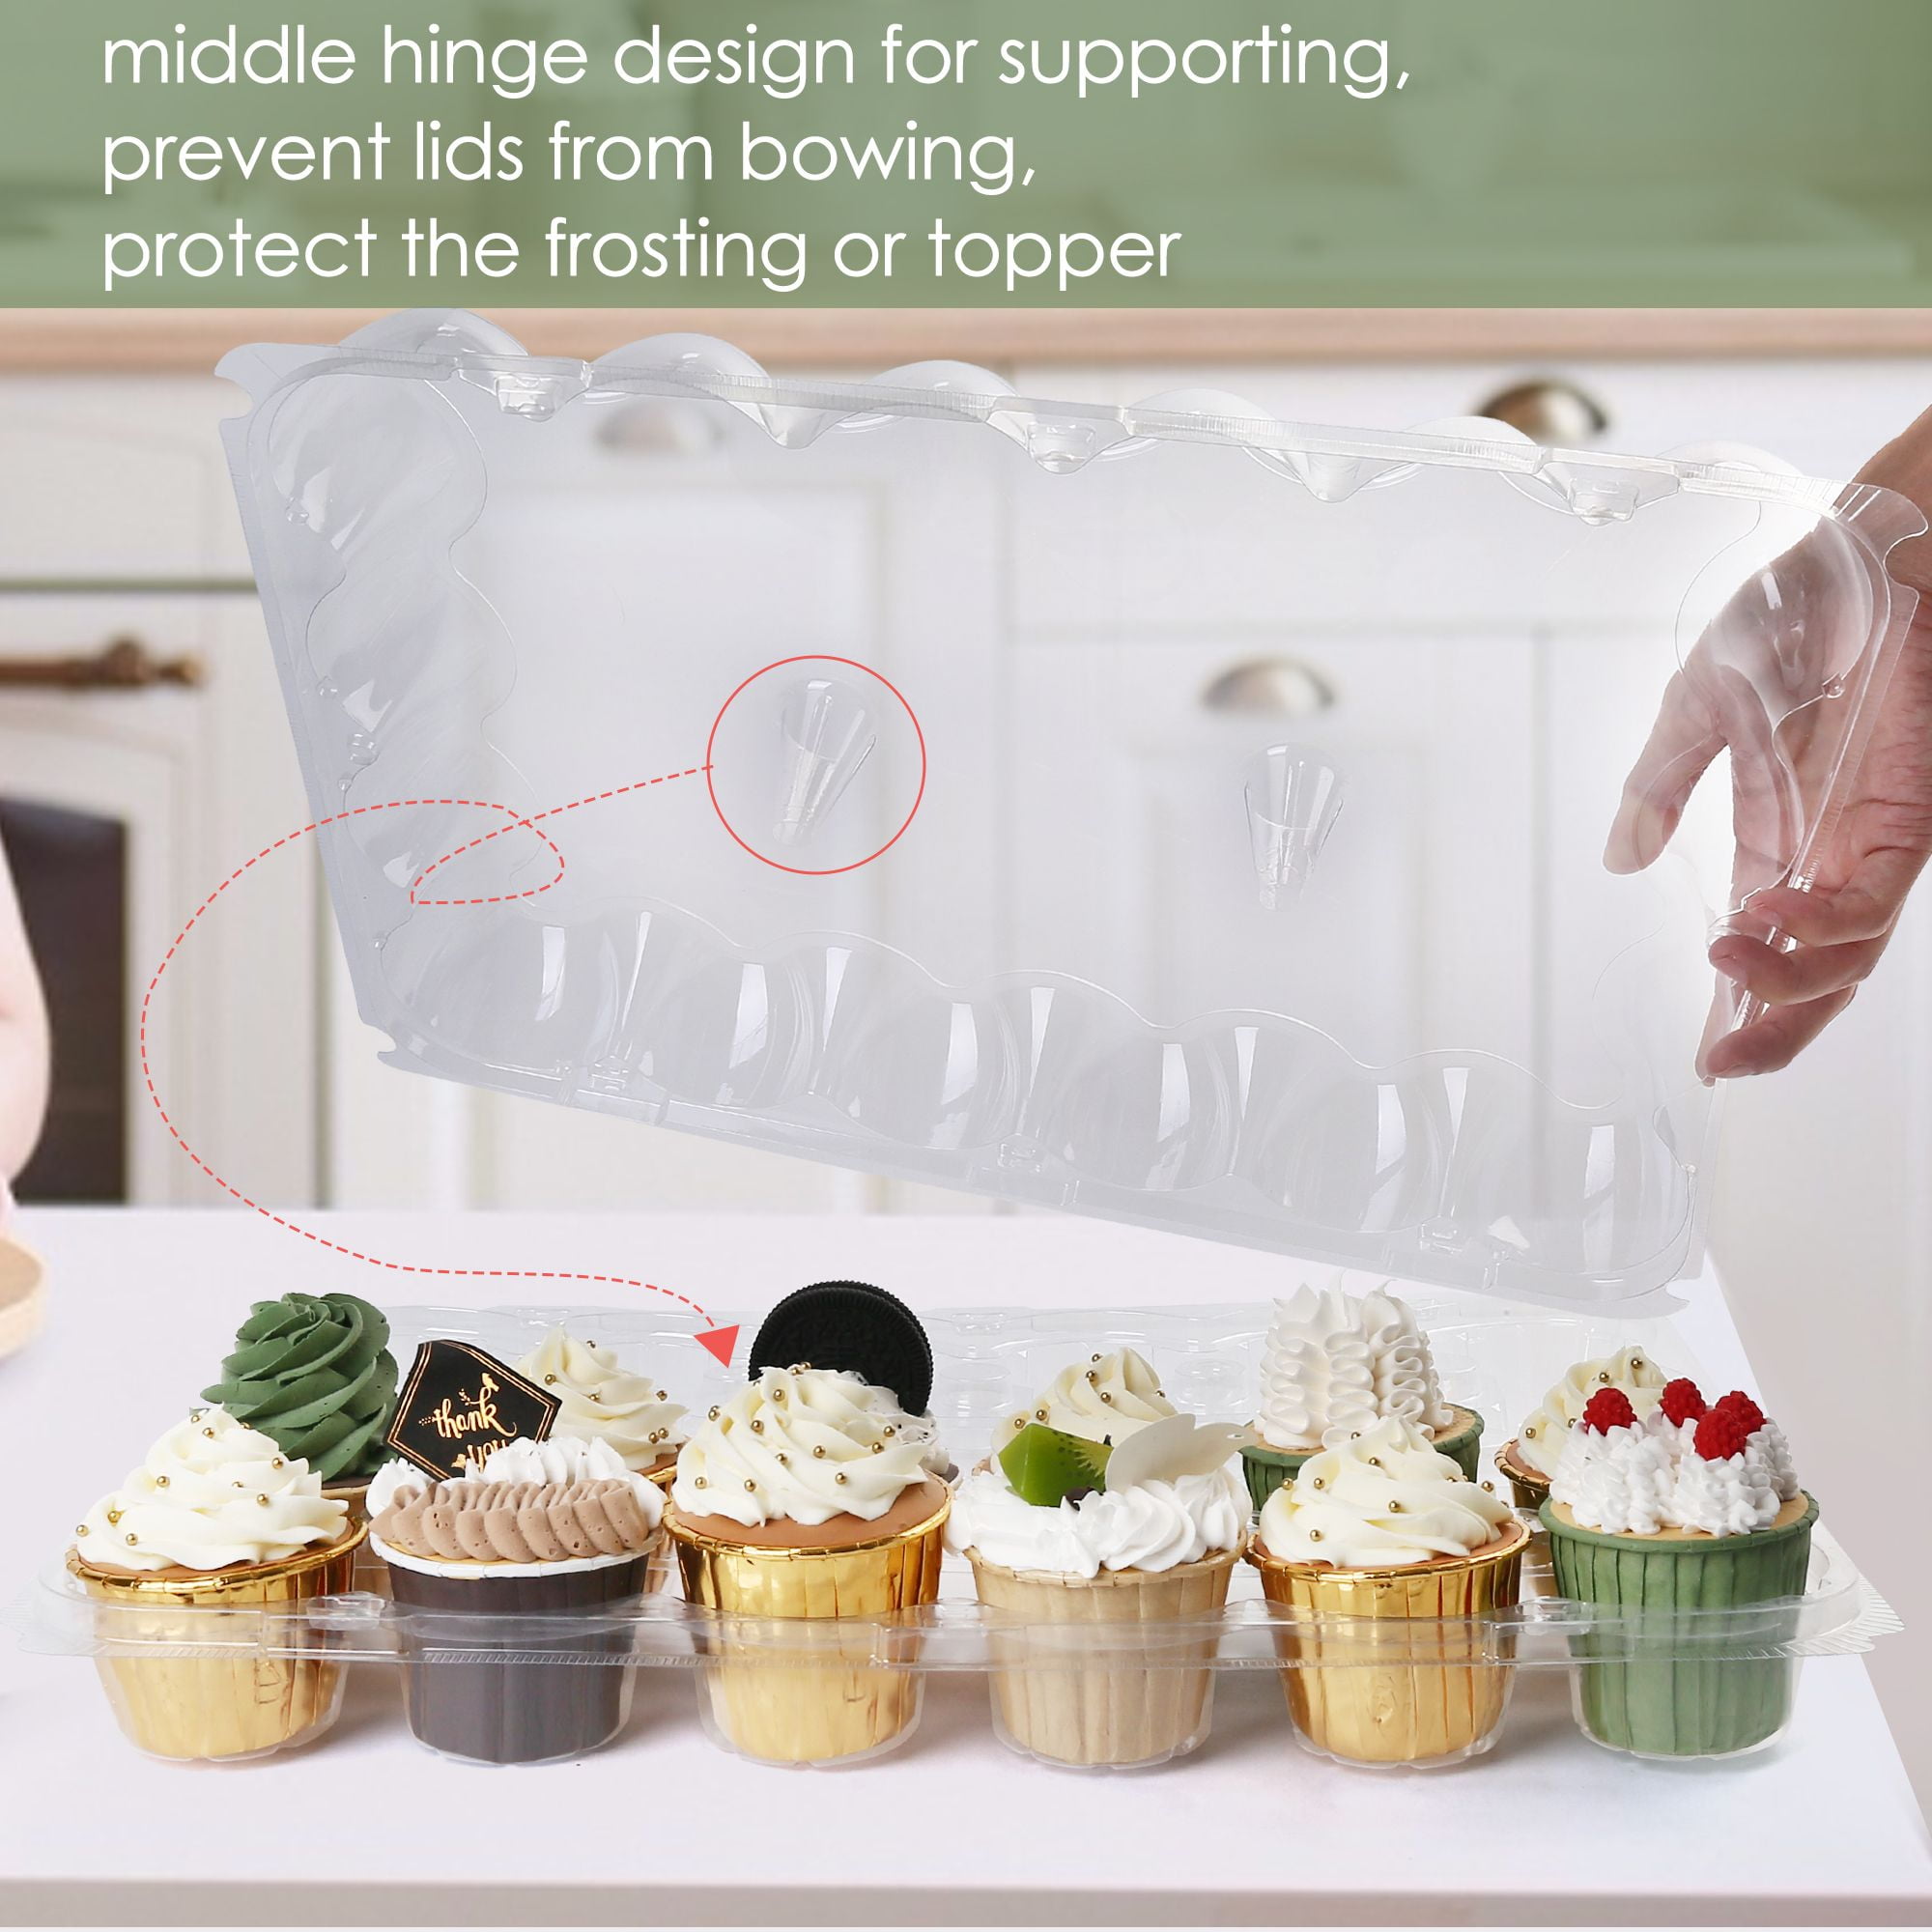 Katgely Disposable Cupcake Box Container - Holds 12 Cupcakes - PBA Free  Plastic - Pack of 10 - ASIN: B0748LJWLQ